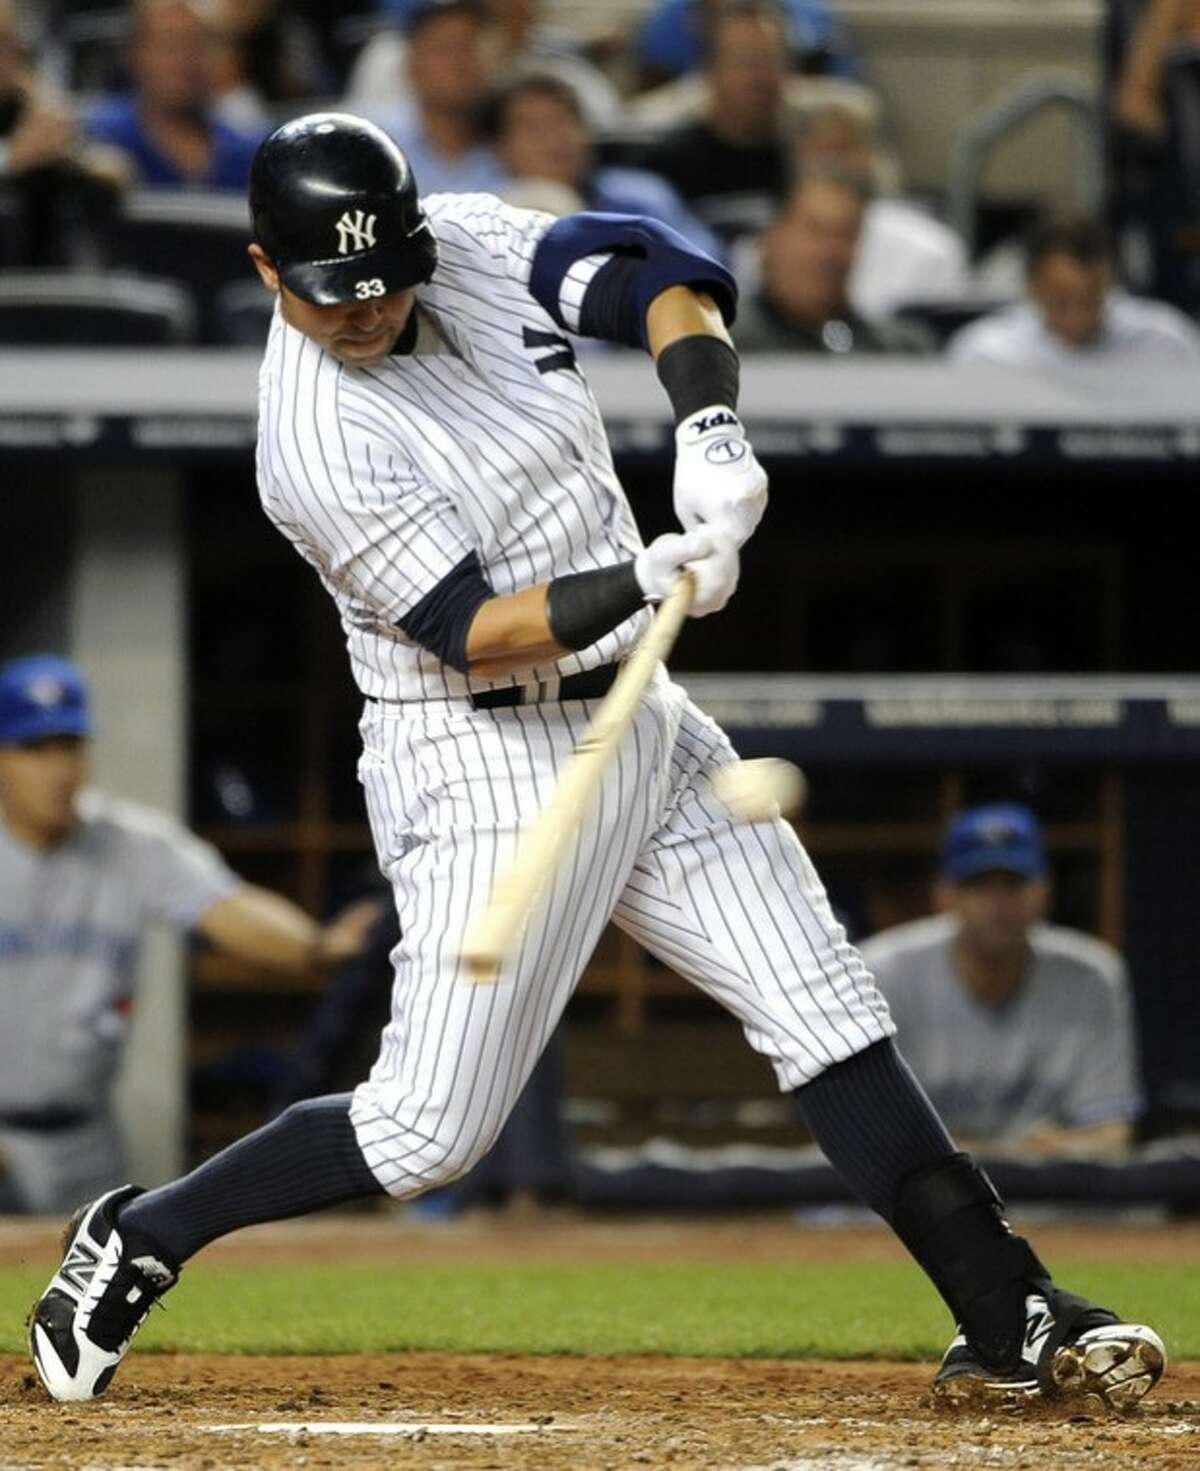 New York Yankees' Nick Swisher hits an RBI single off of Toronto Blue Jays starting pitcher Ricky Romero in the third inning of a baseball game on Tuesday, Aug., 28, 2012, in New York. (AP Photo/Kathy Kmonicek)